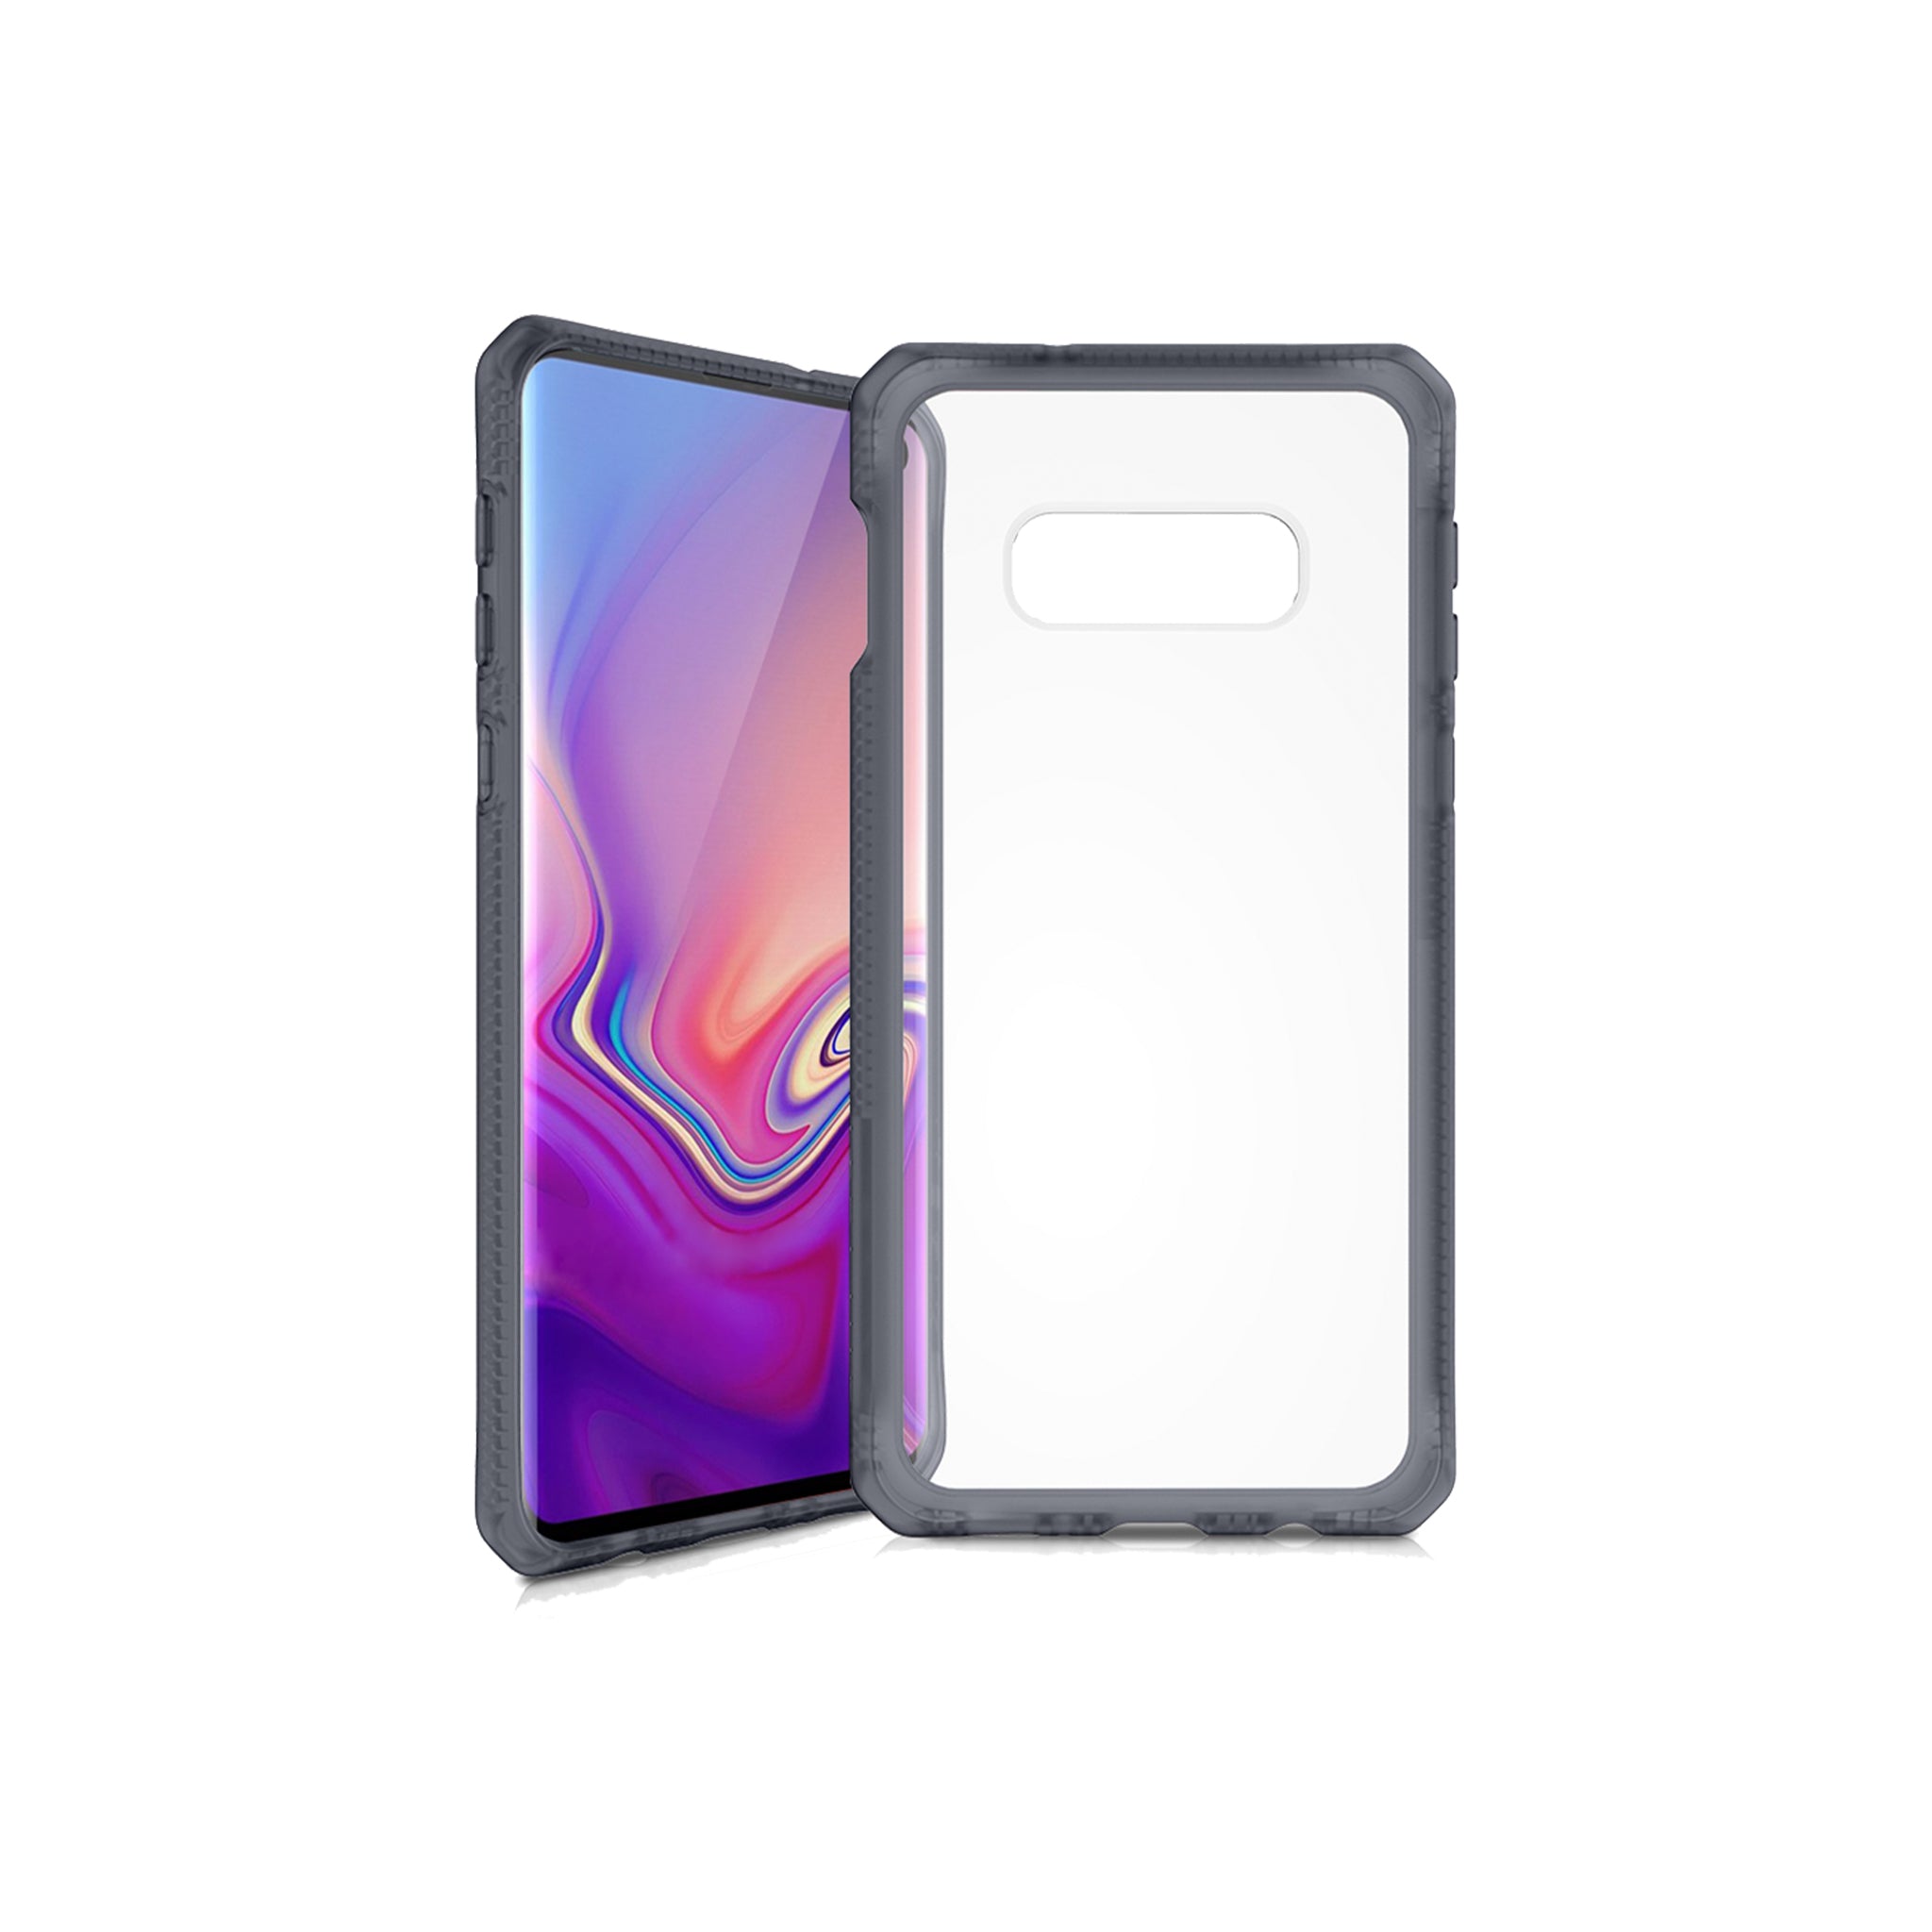 Itskins - Hybrid Frost Mkii Case For Samsung Galaxy S10e - Black And Transparent